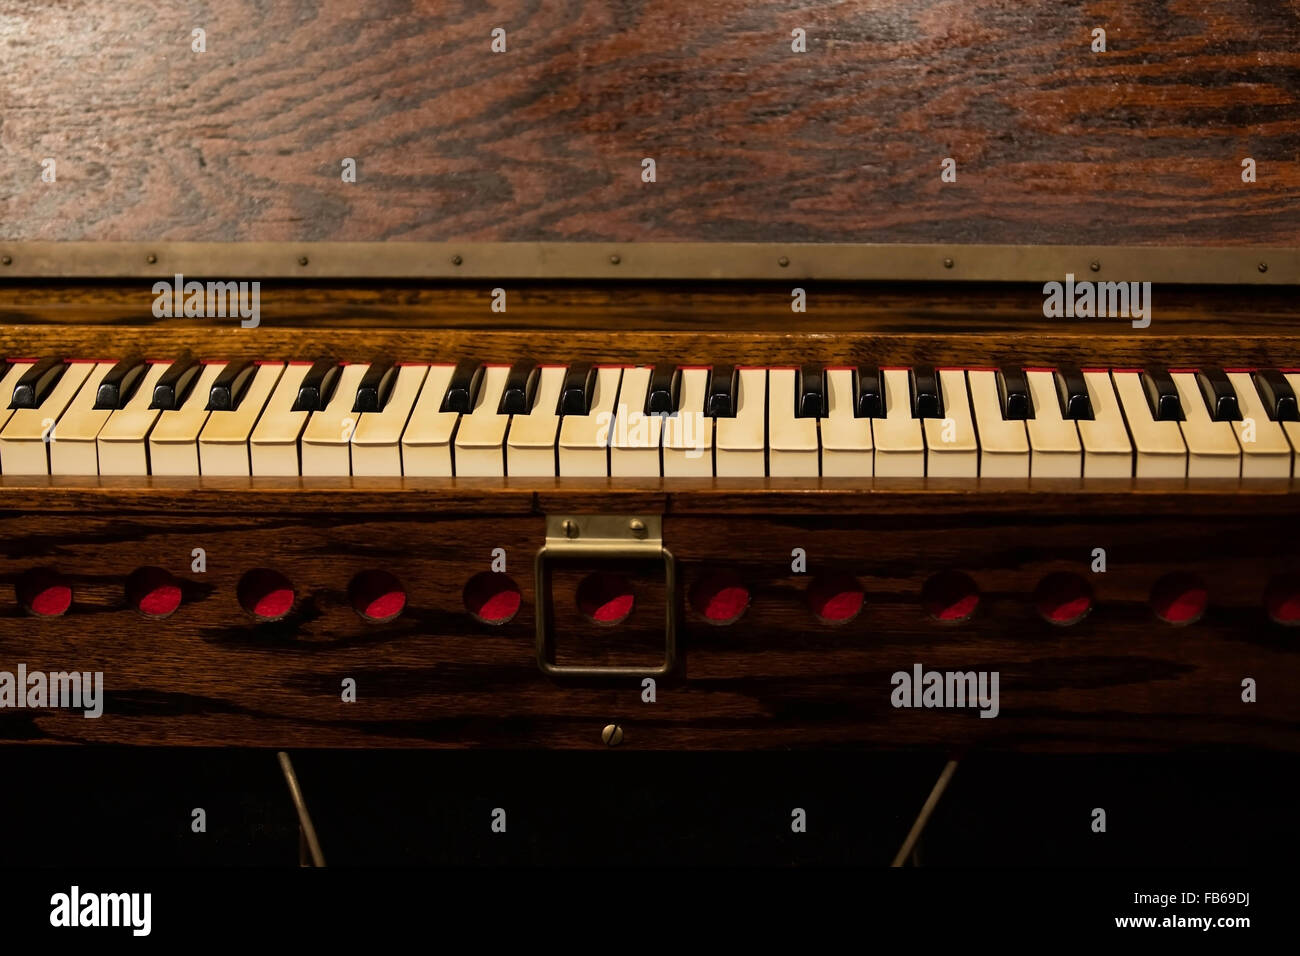 Vintage piano and keyboard Stock Photo